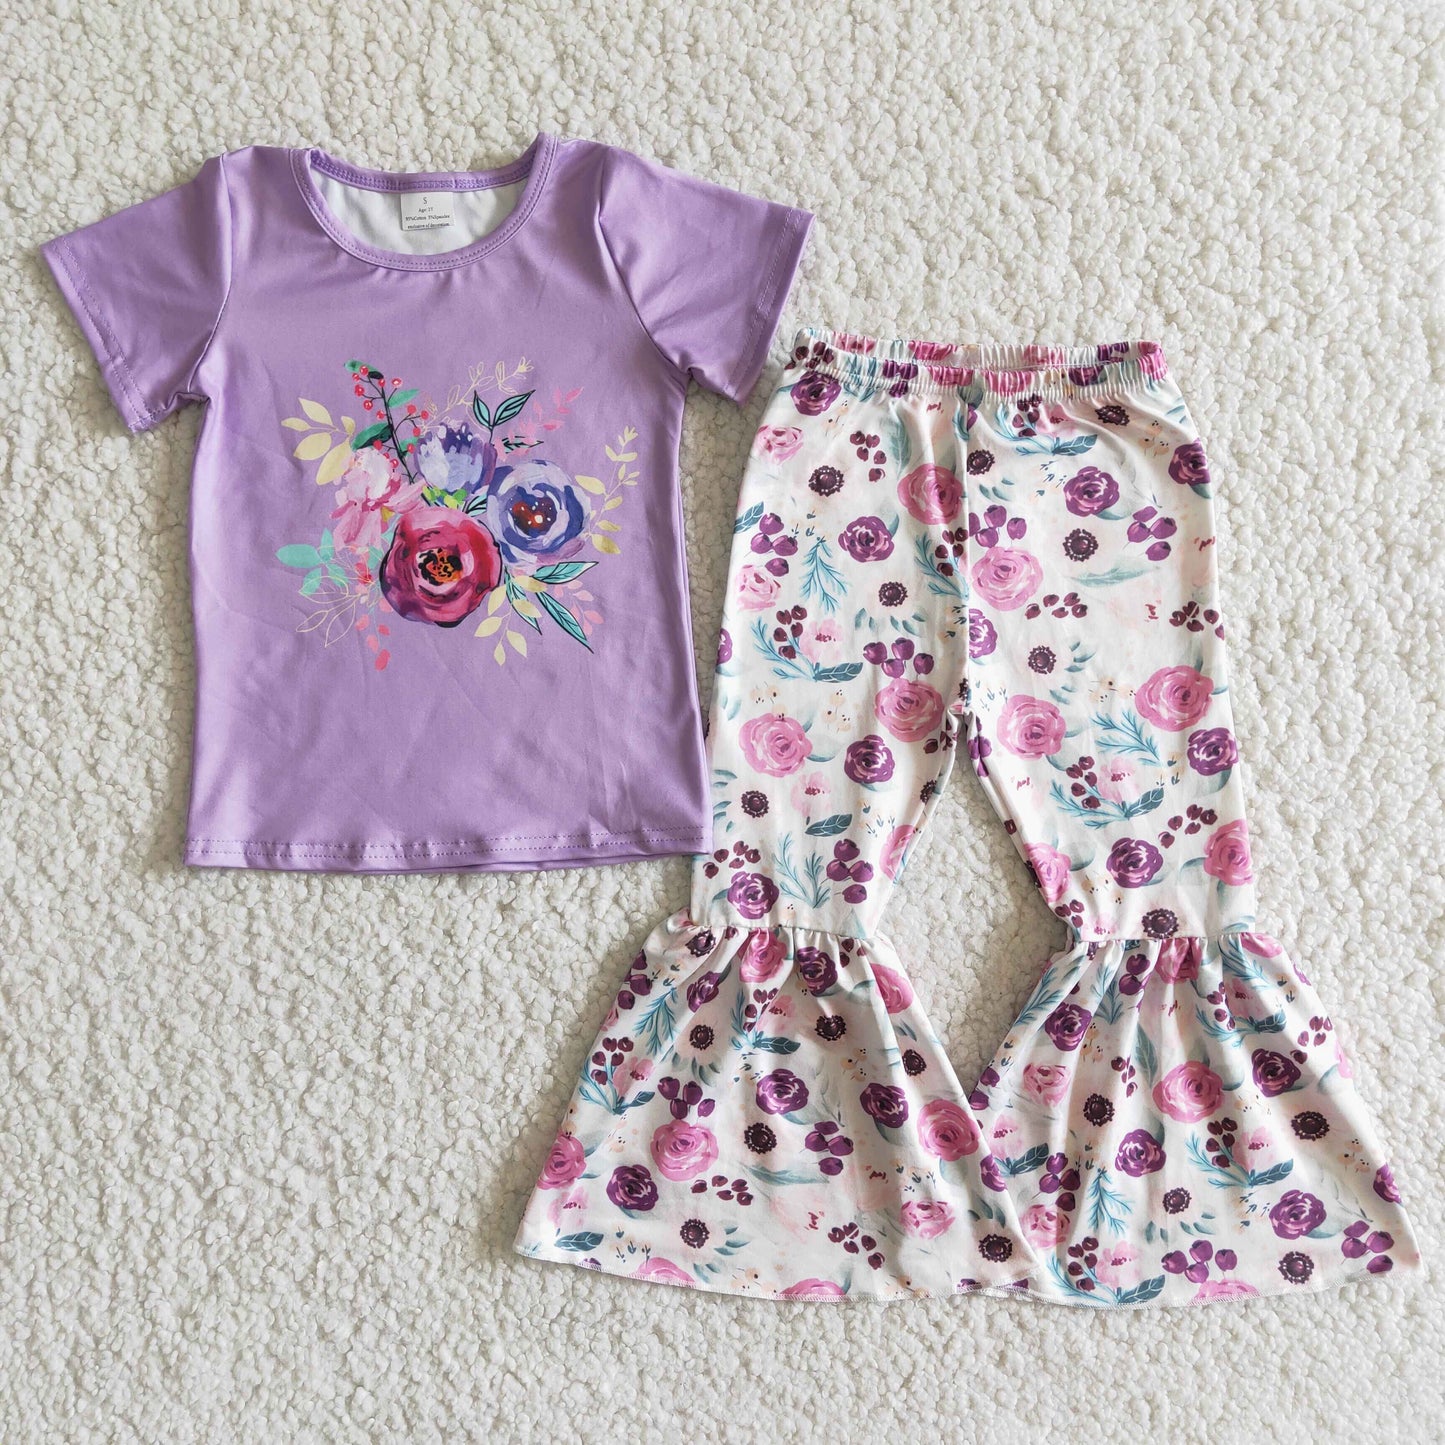 girl purple top and flowers pattern bell pants outfit